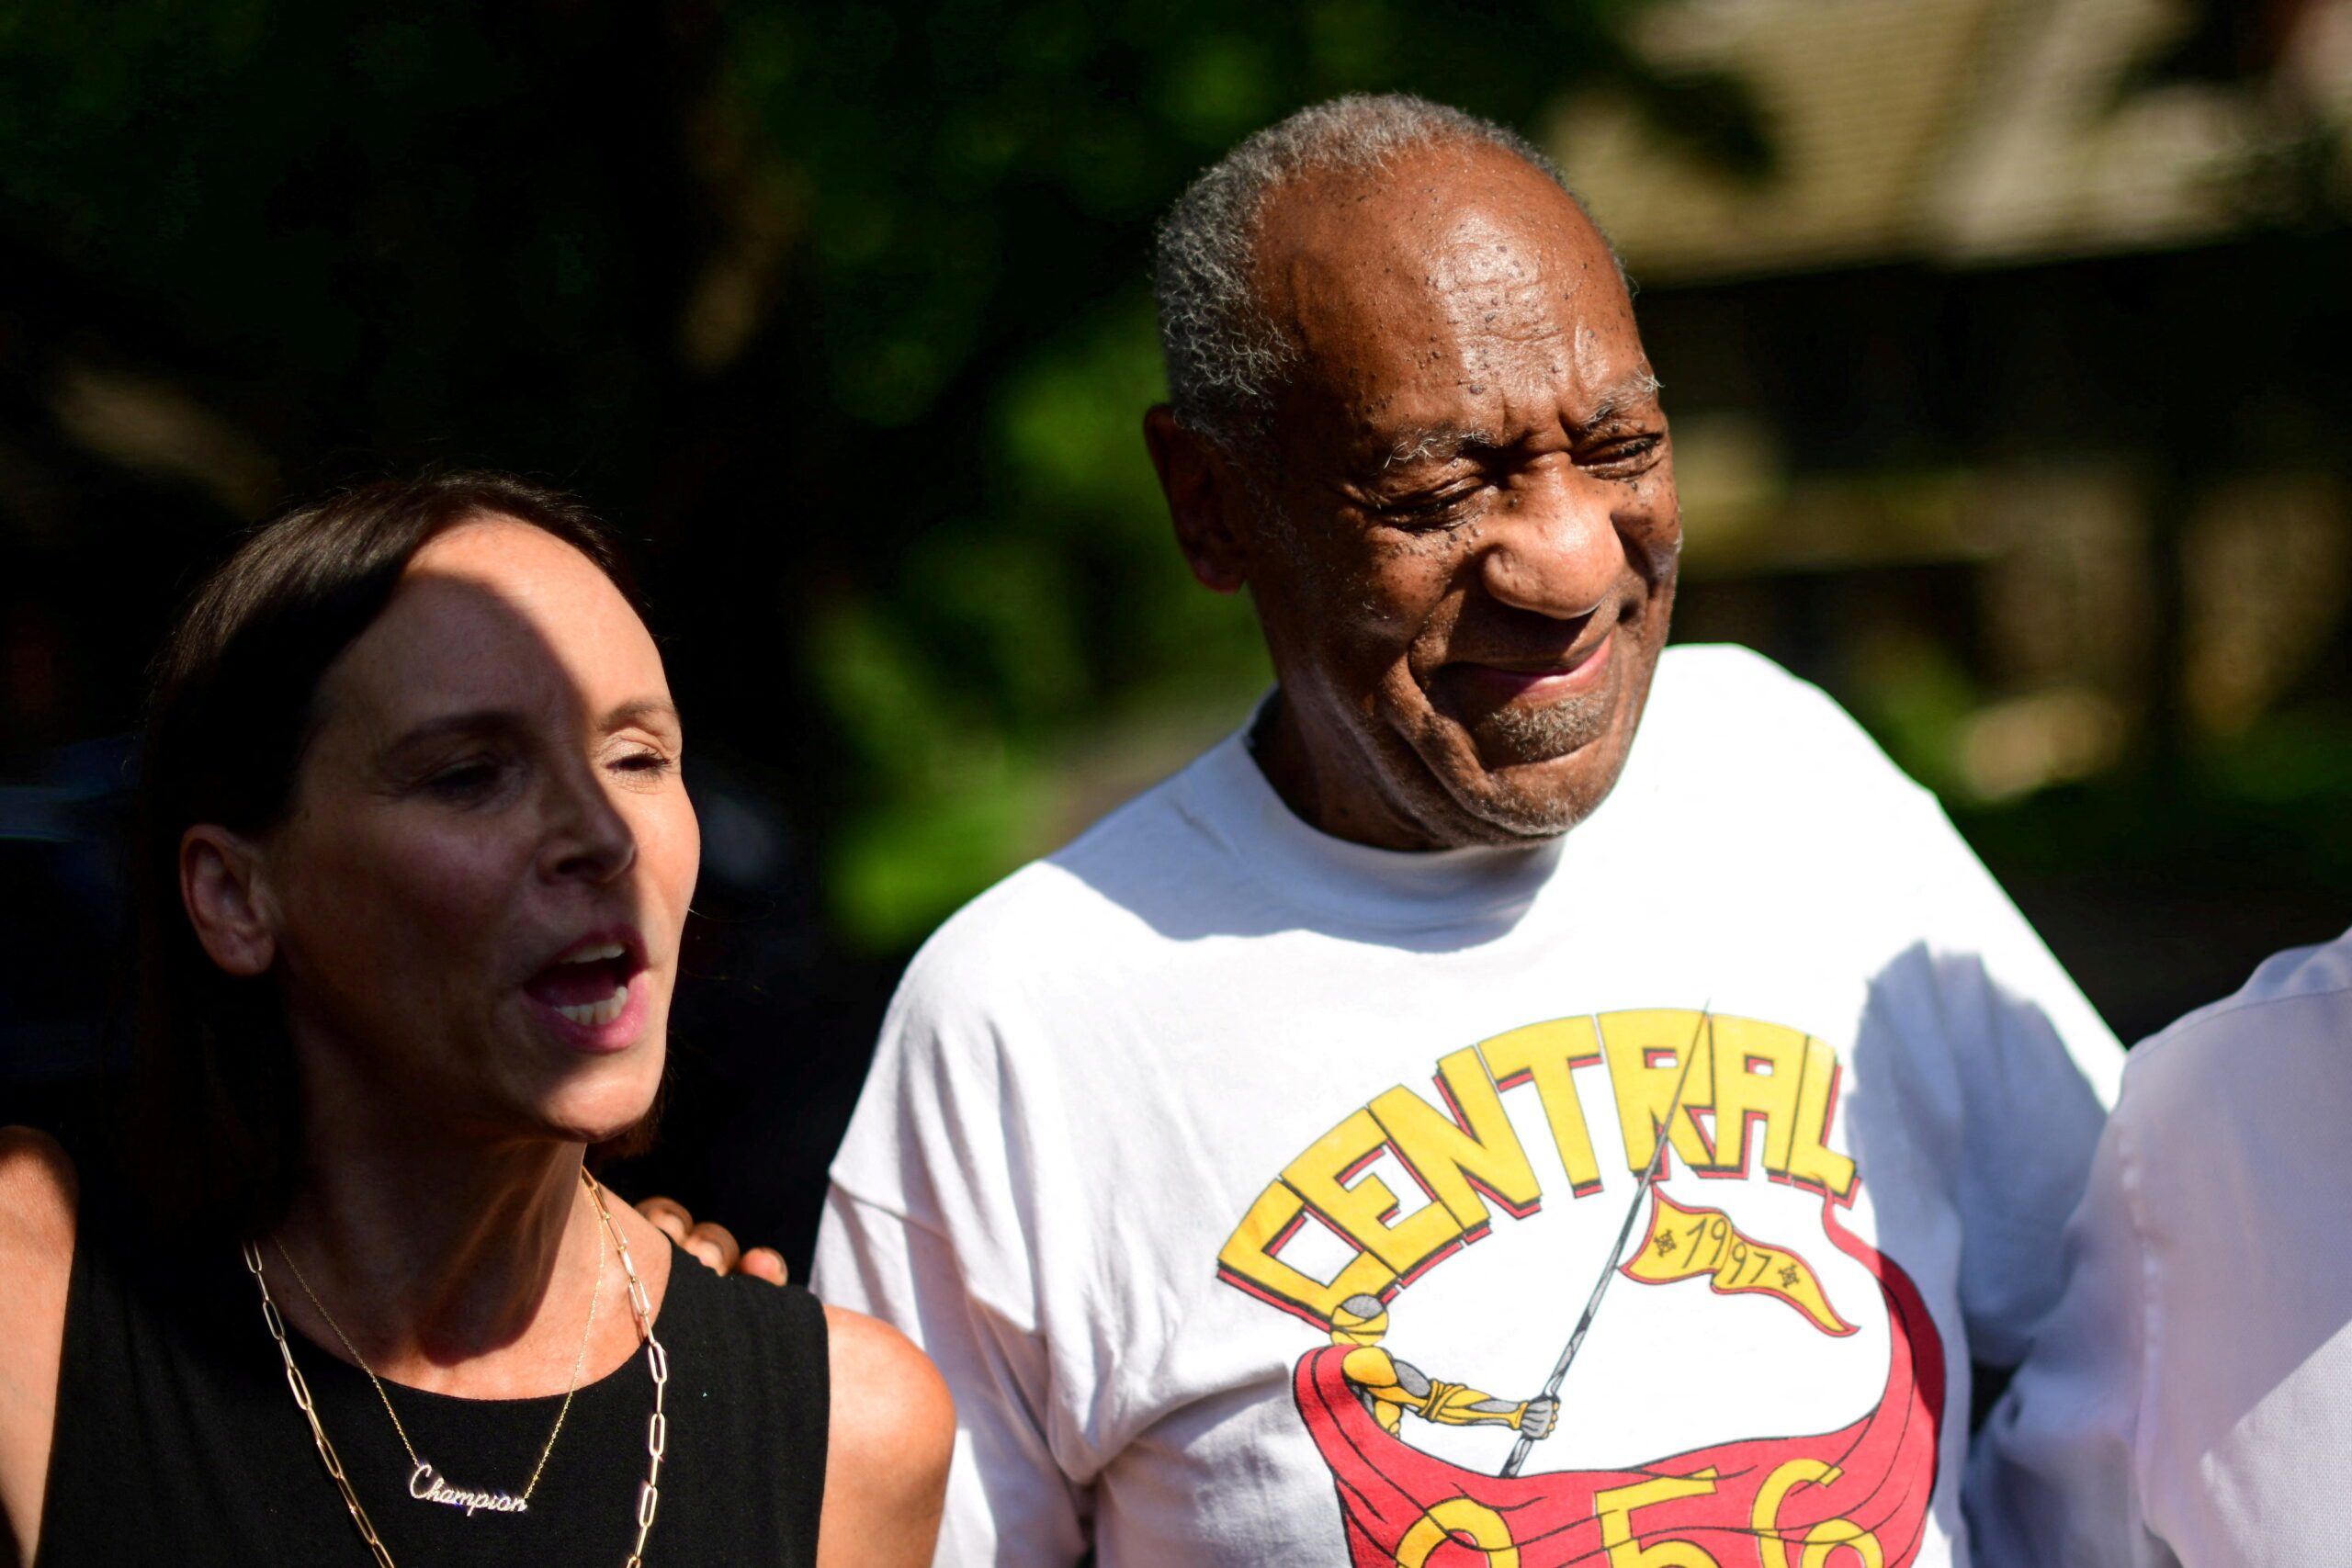 Cosby accuser seeks damages, his side says ‘game over’ in final arguments